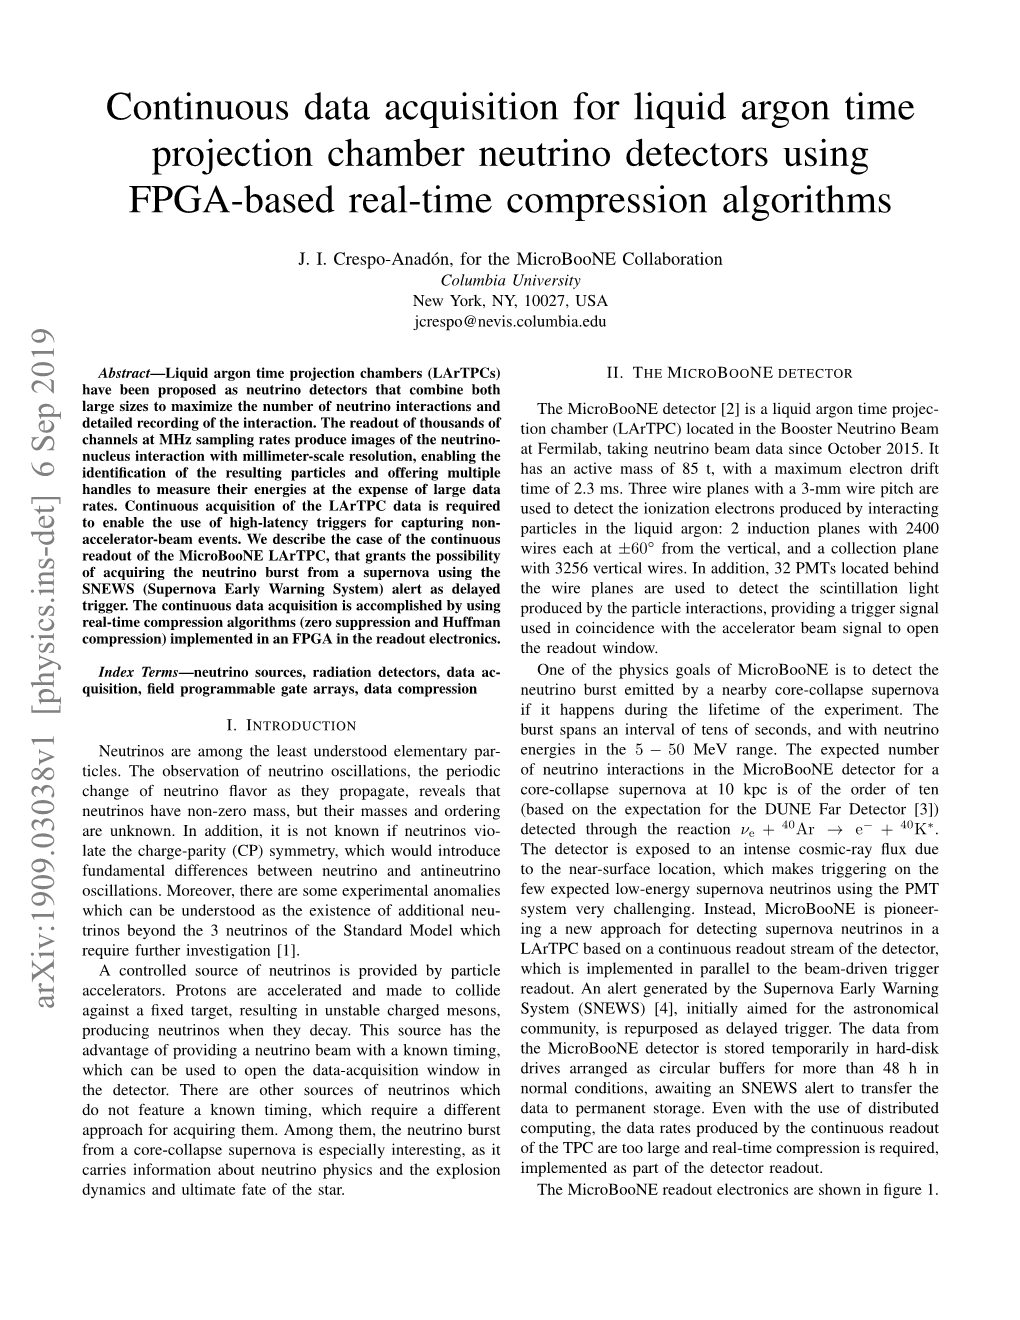 Continuous Data Acquisition for Liquid Argon Time Projection Chamber Neutrino Detectors Using FPGA-Based Real-Time Compression Algorithms